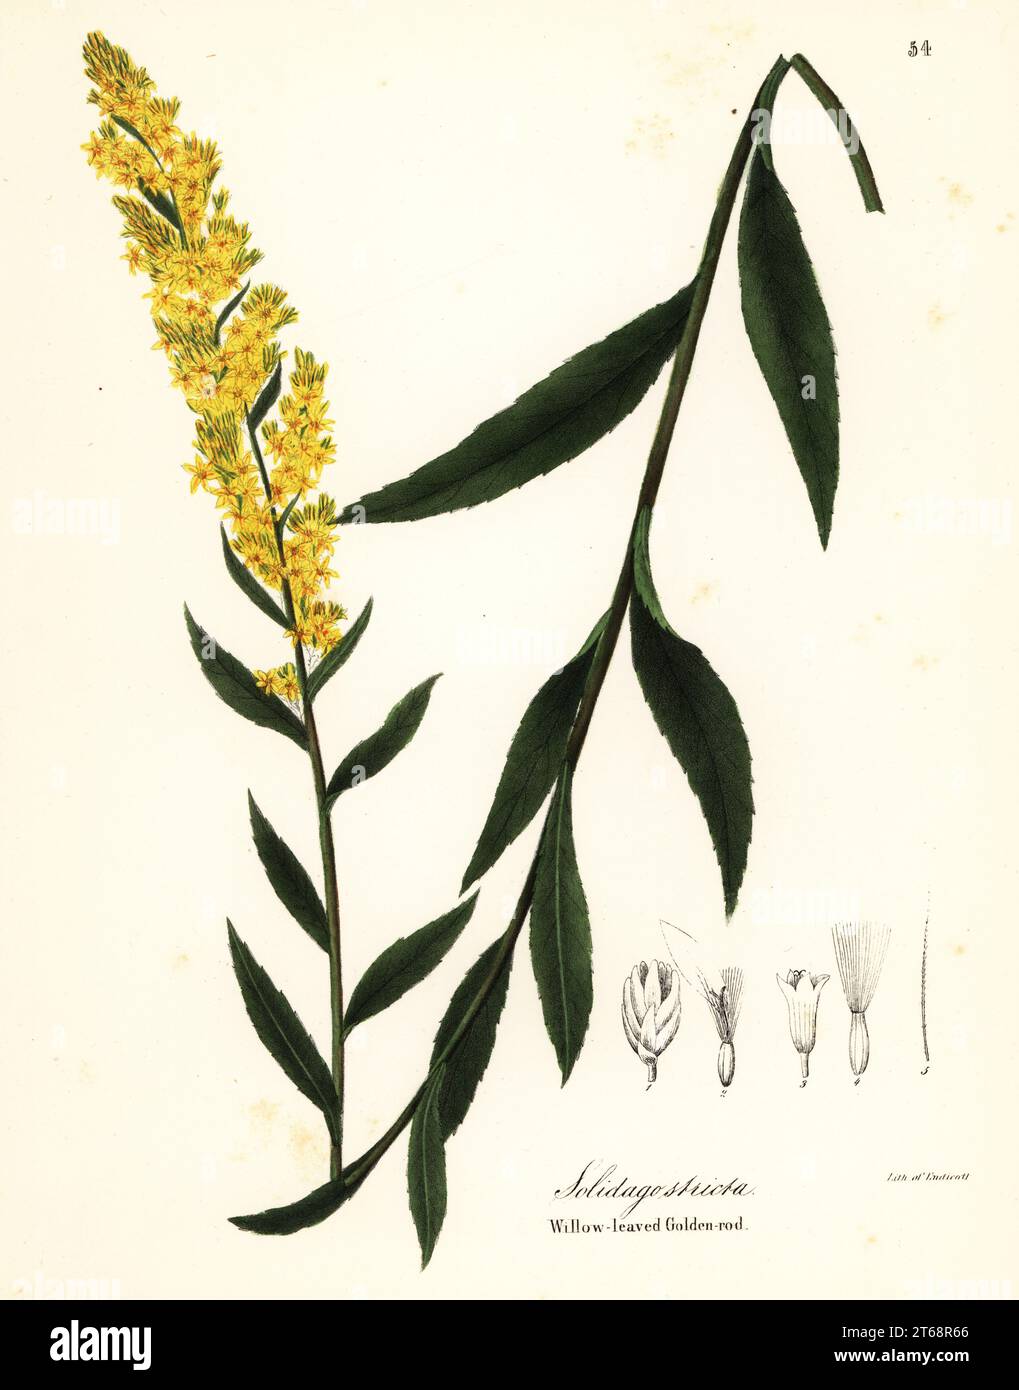 Wand goldenrod, willowleaf goldenrod or willow-leaved golden-rod, Solidago stricta. Handcoloured lithograph by Endicott after a botanical illustration from John Torreys A Flora of the State of New York, Carroll and Cook, Albany, 1843. The plates drawn by John Torrey, Agnes Mitchell, Elizabeth Paoley and Swinton. John Torrey was an American botanist, chemist and physician 1796-1873. Stock Photo